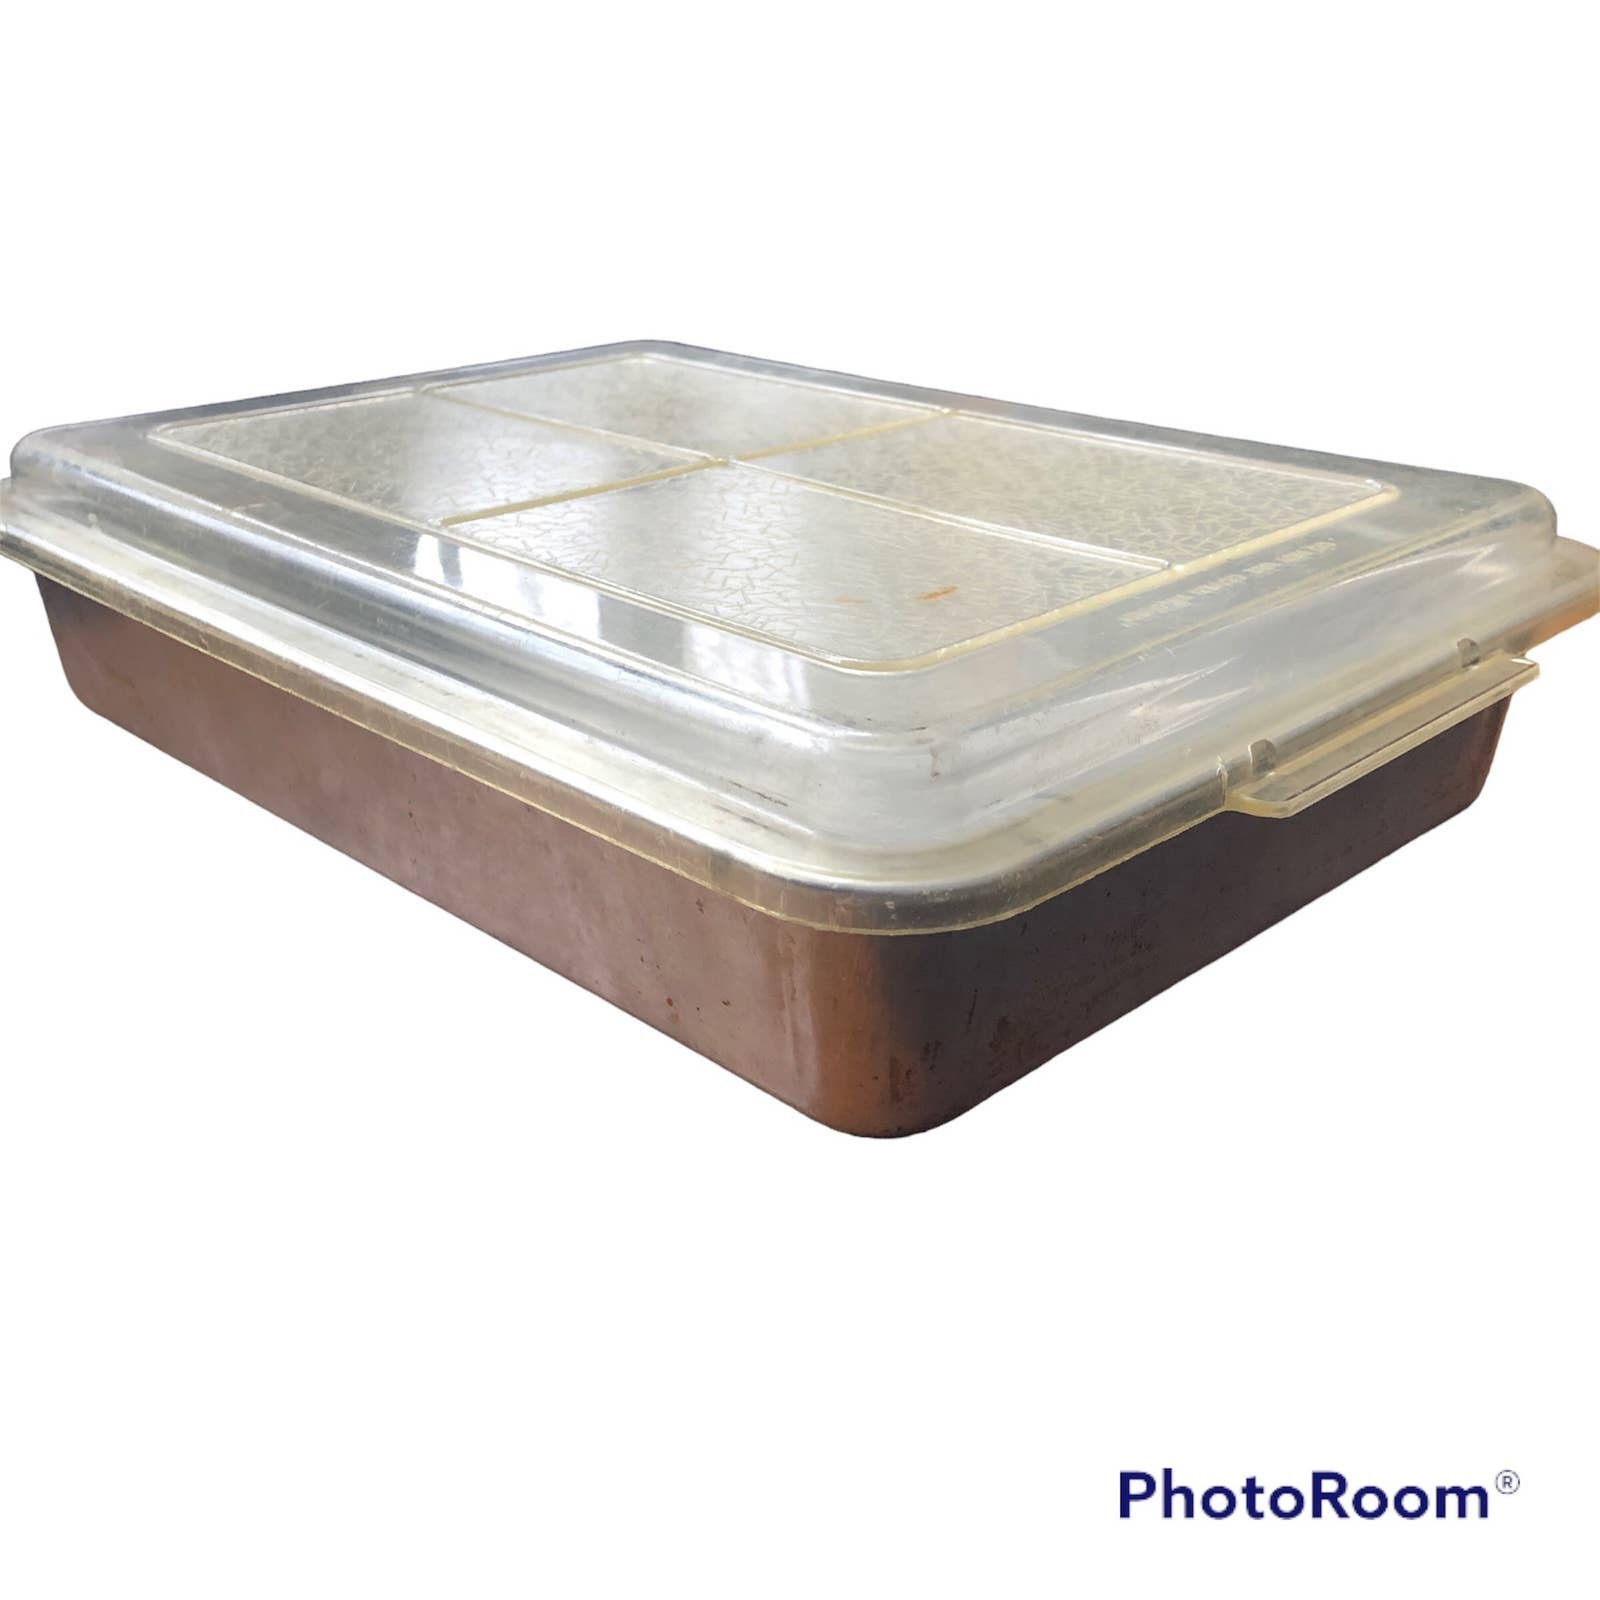 13 X 9 REMA Air Bake, Double-wall, Insulated, Cake Baking Pan With Lid  Aluminum Plastic Lid 